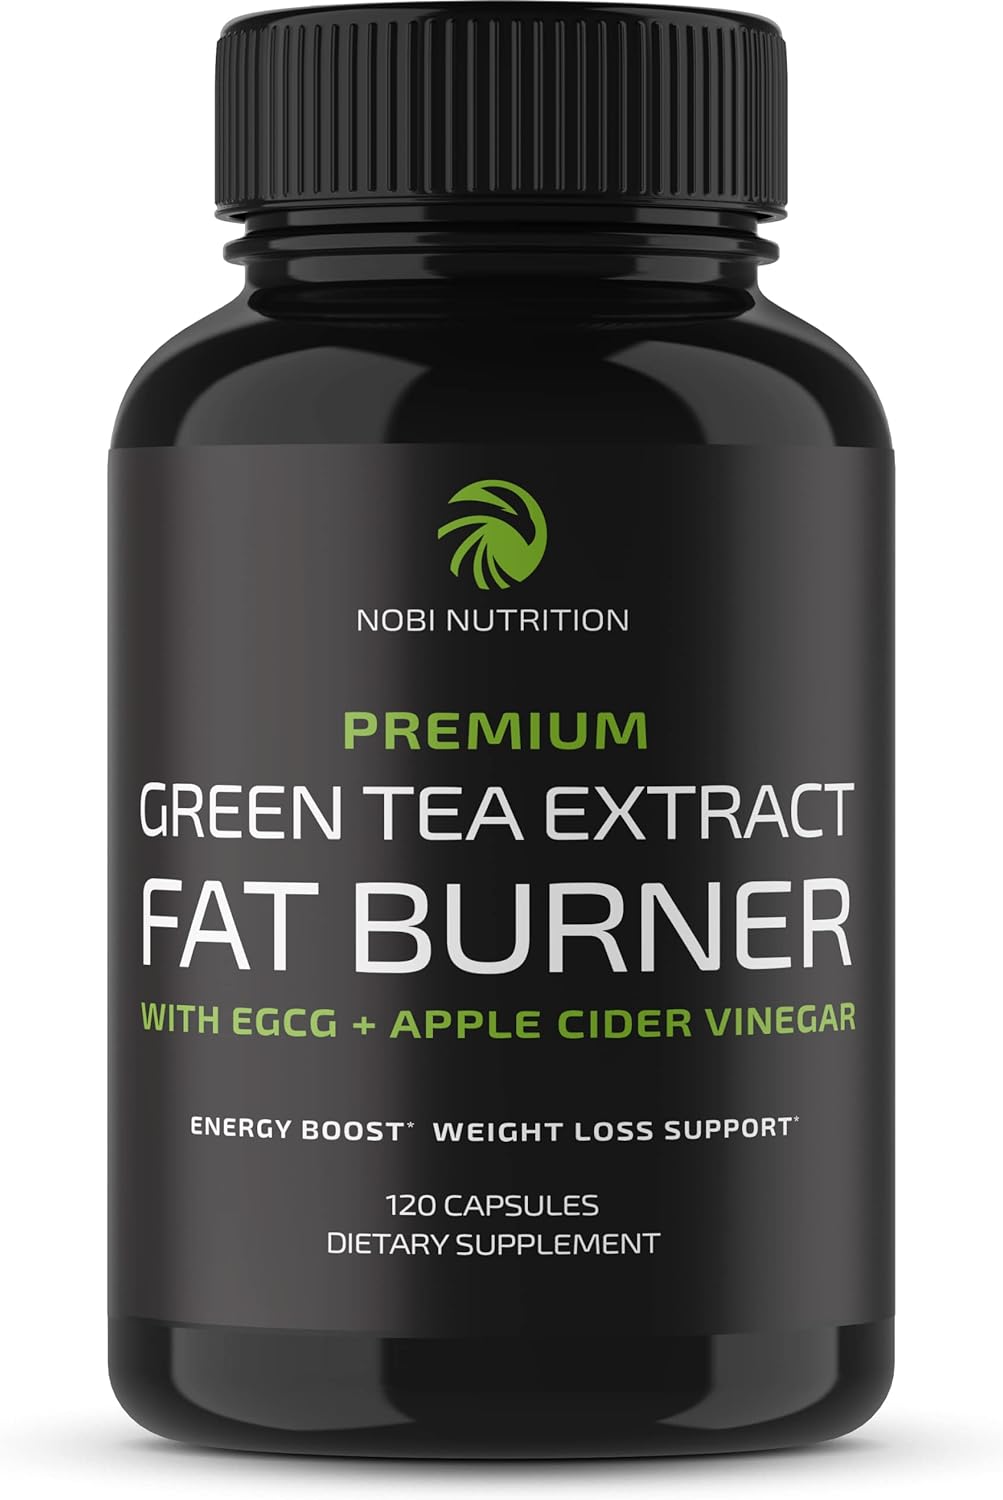 Green Tea Weight Loss Pills with Green Coffee Bean Extract | Belly Fat Burner, Metabolism Booster, Appetite Suppressant for Women Men | 45% EGCG | Vegan, Gluten-Free Supplement | 60 Capsules